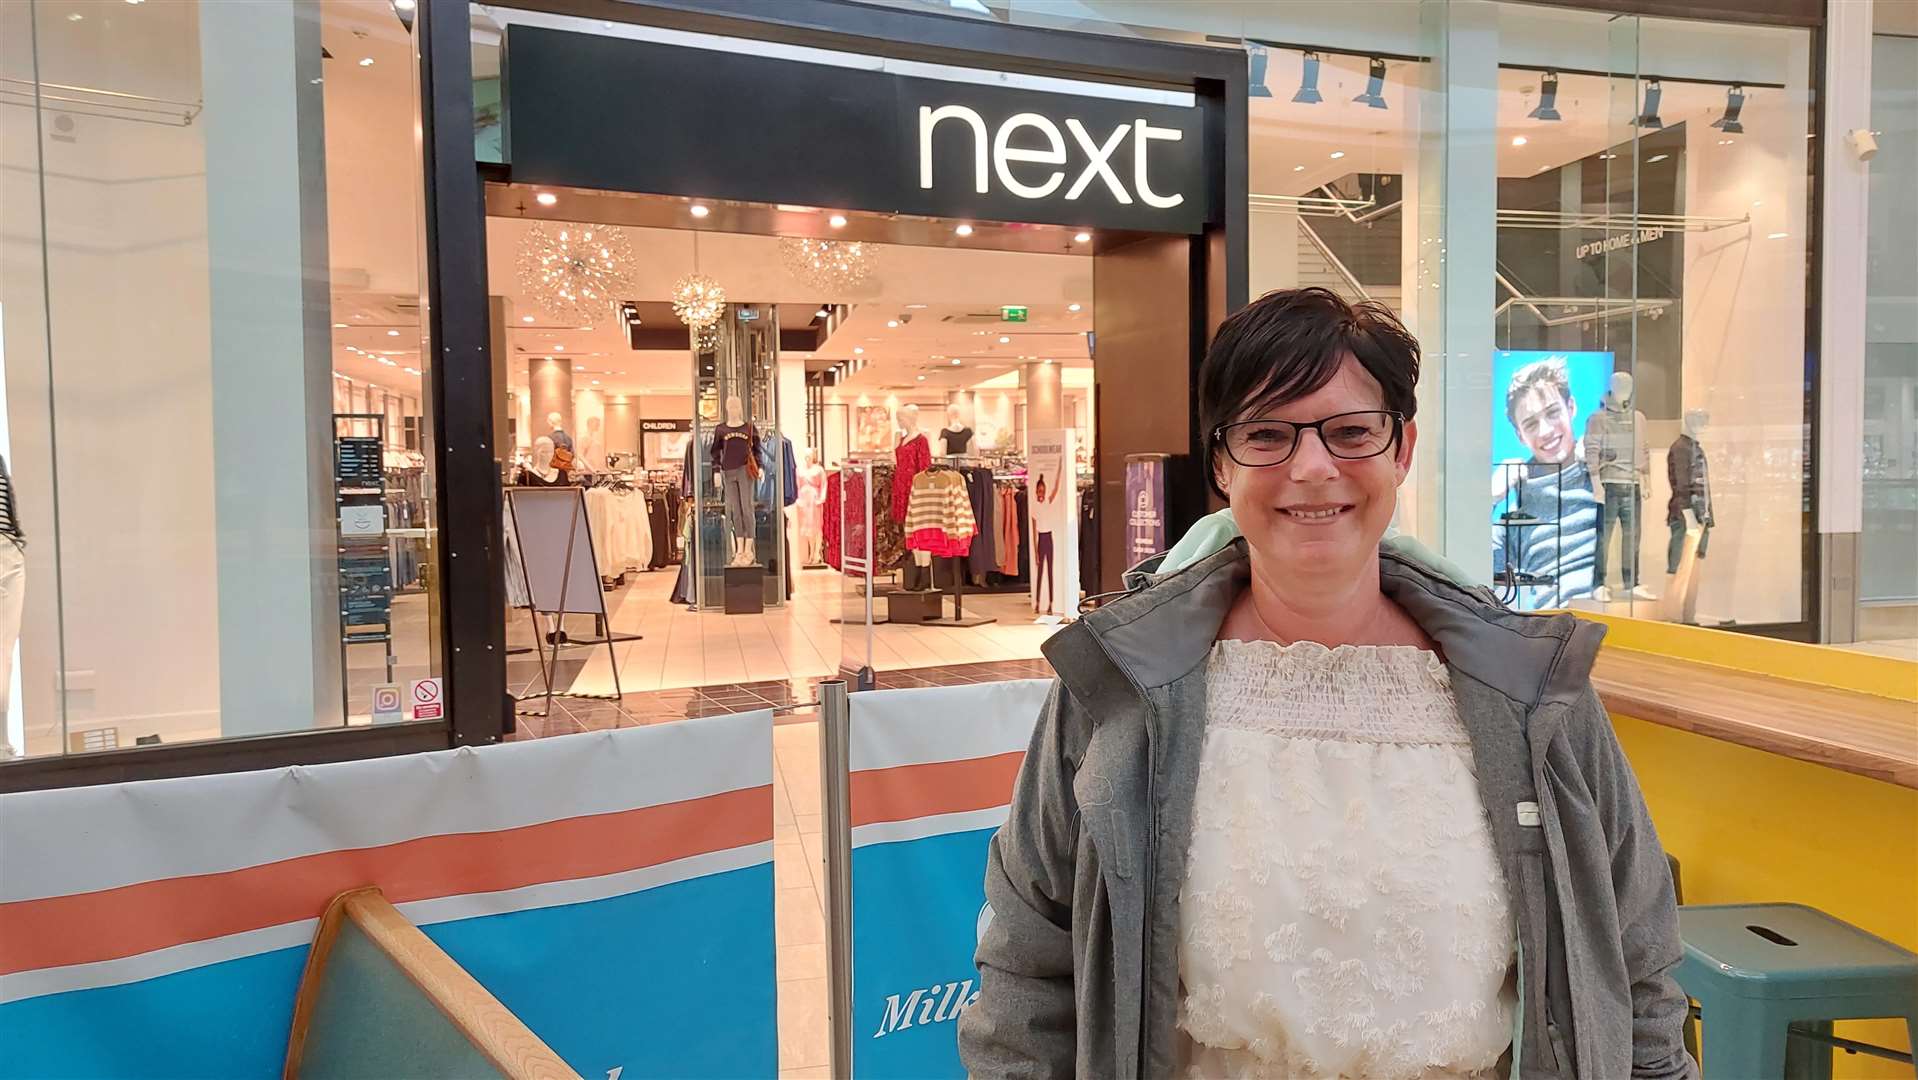 Karen Beaney likes to look in Next for clothes for her grandchildren